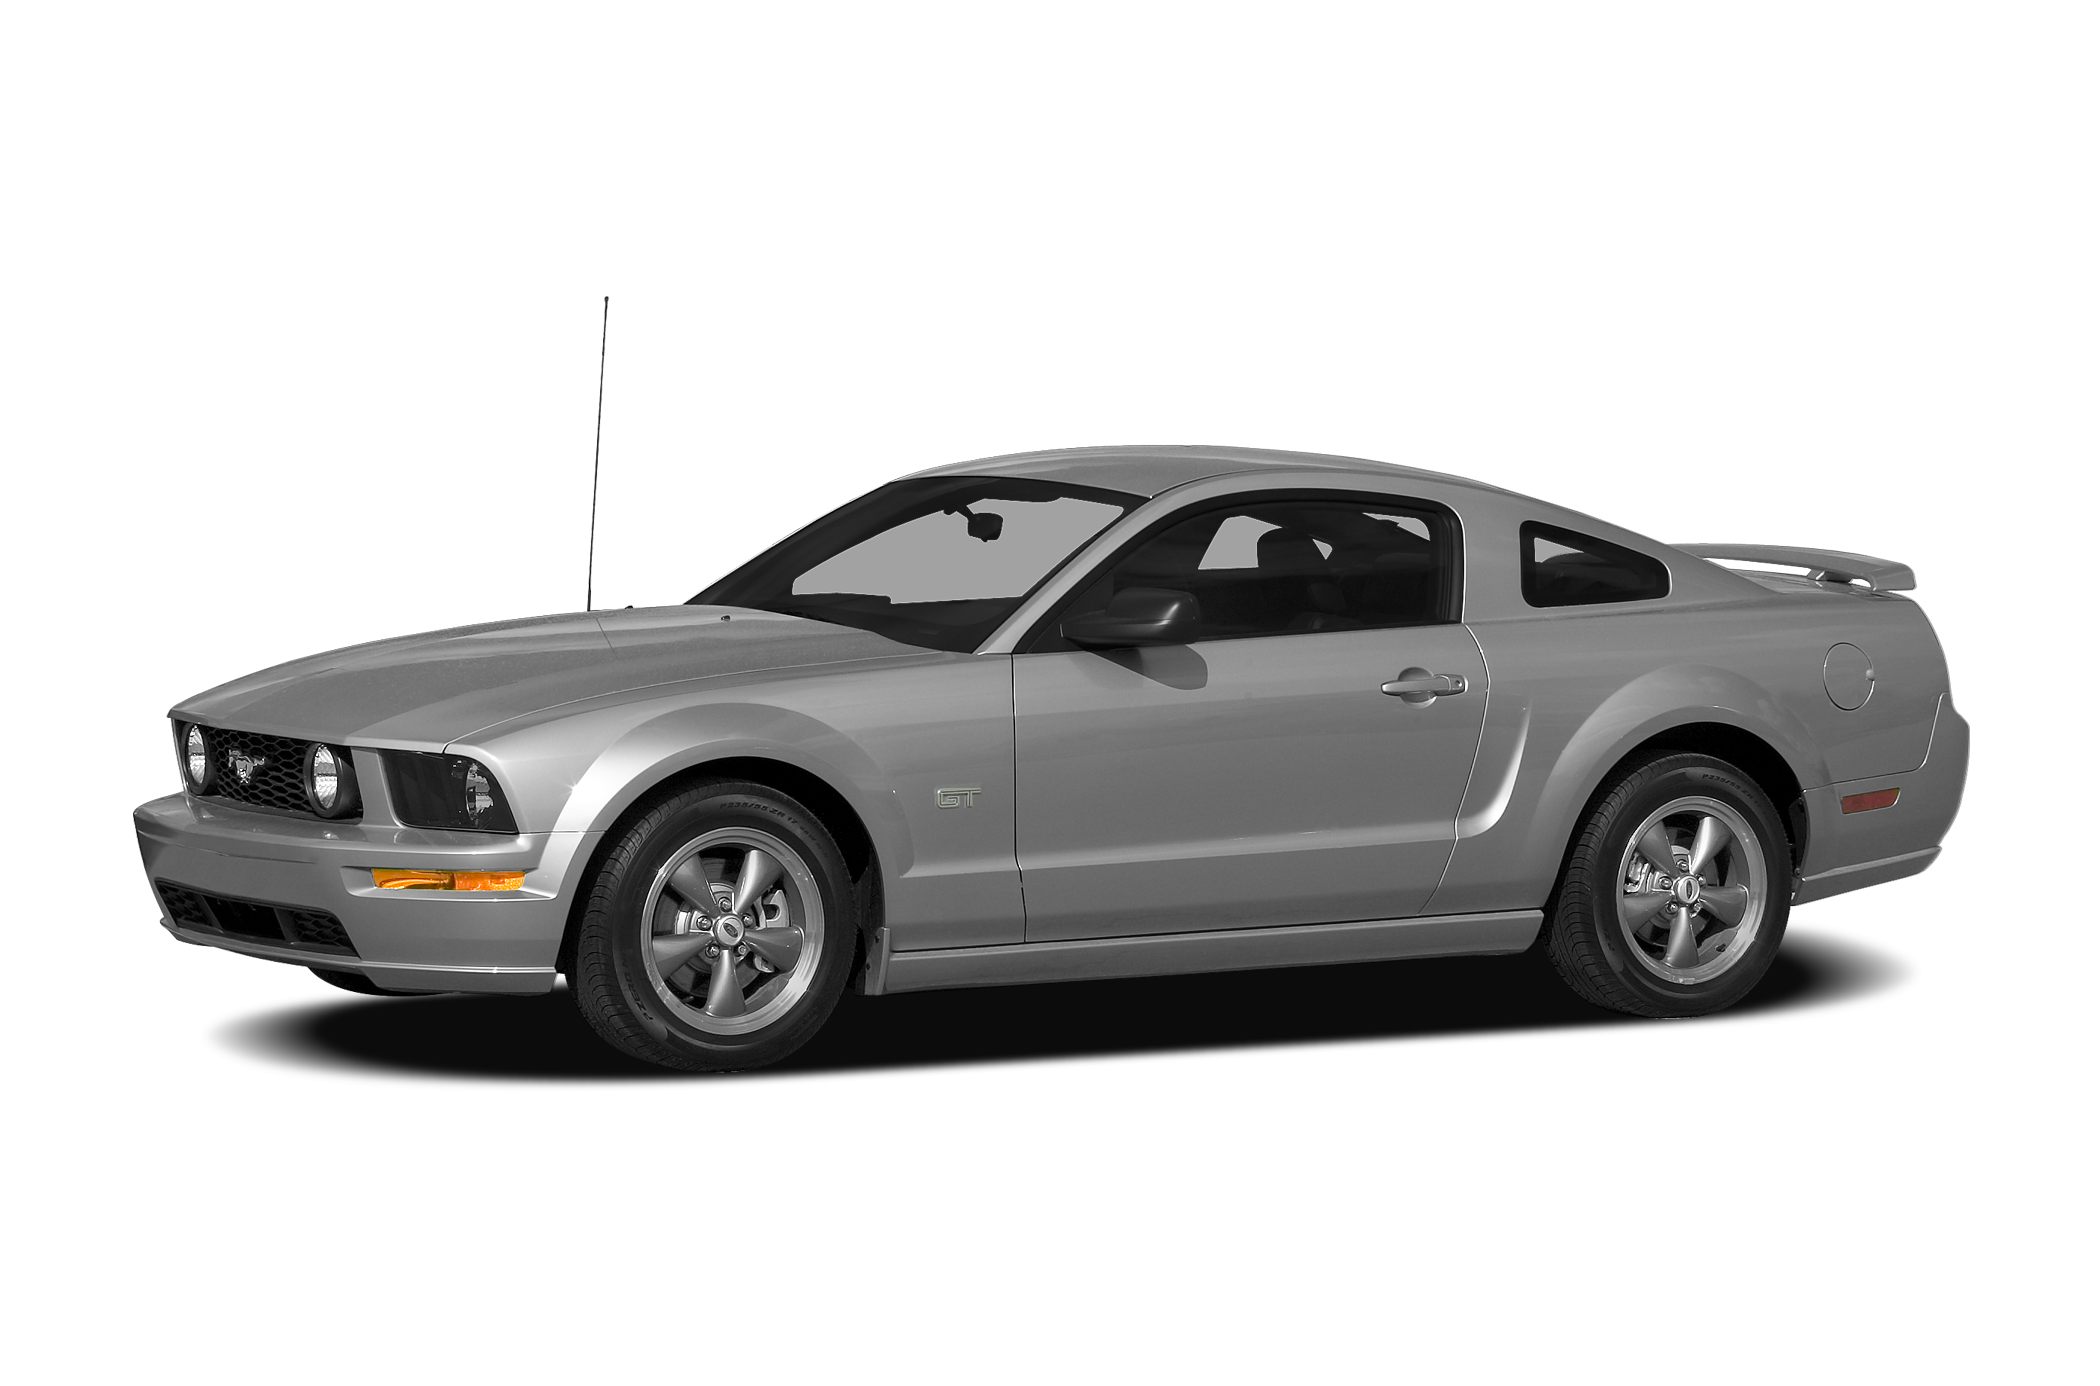 2008 ford mustang engine 4.6 l v8